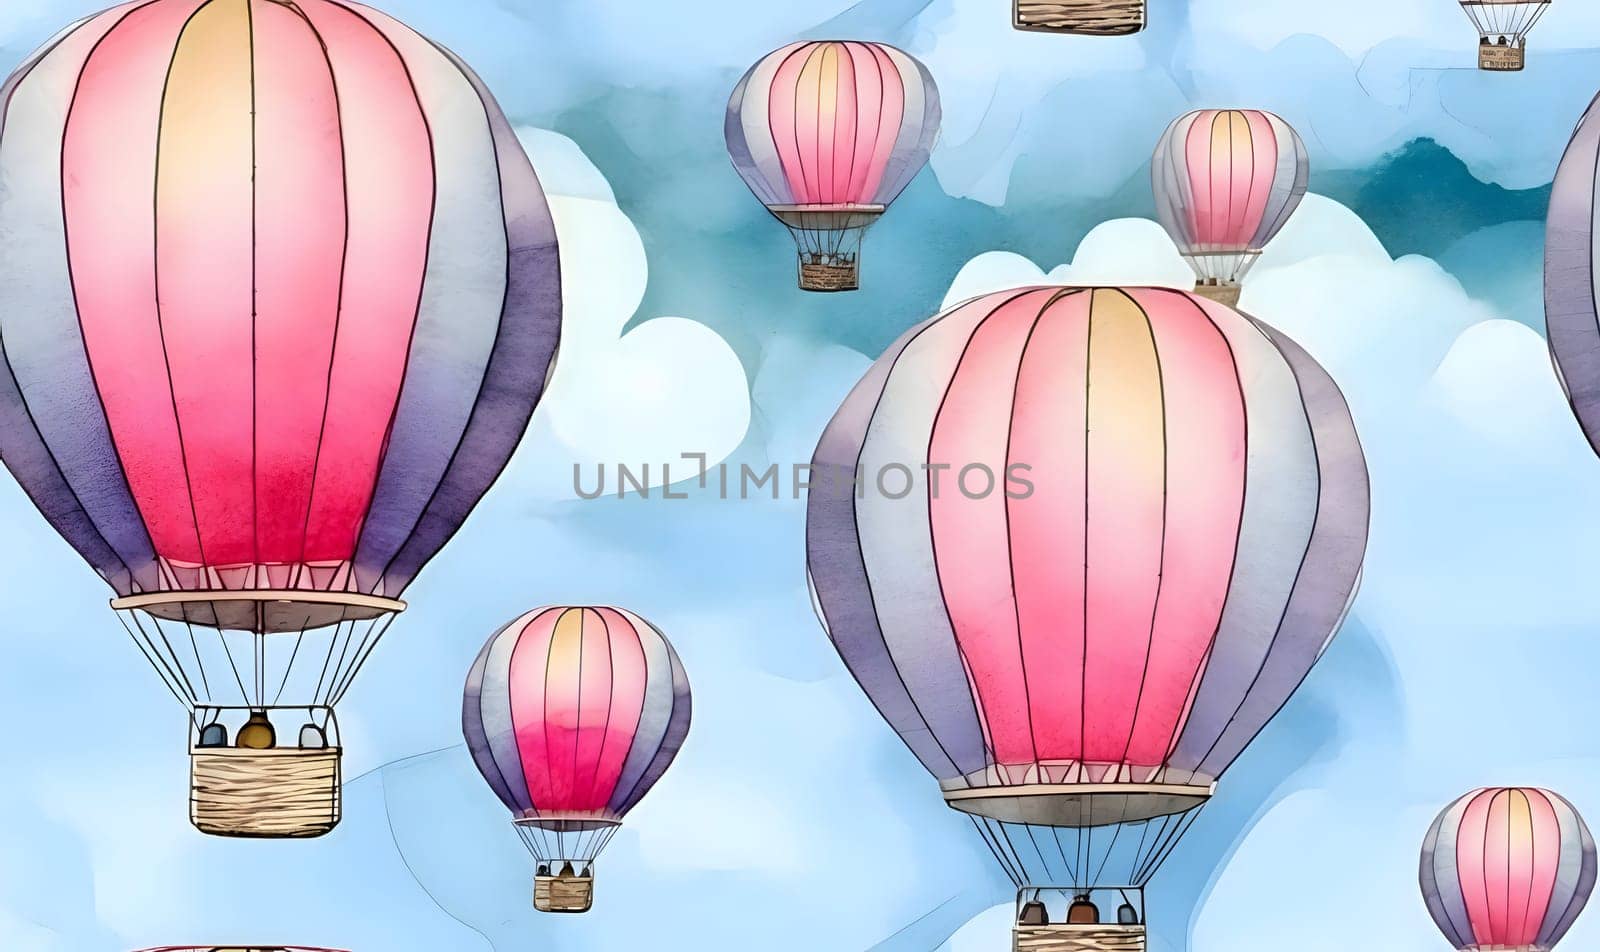 Patterns and banners backgrounds: Watercolor seamless pattern with hot air balloons in the sky. Hand drawn illustration